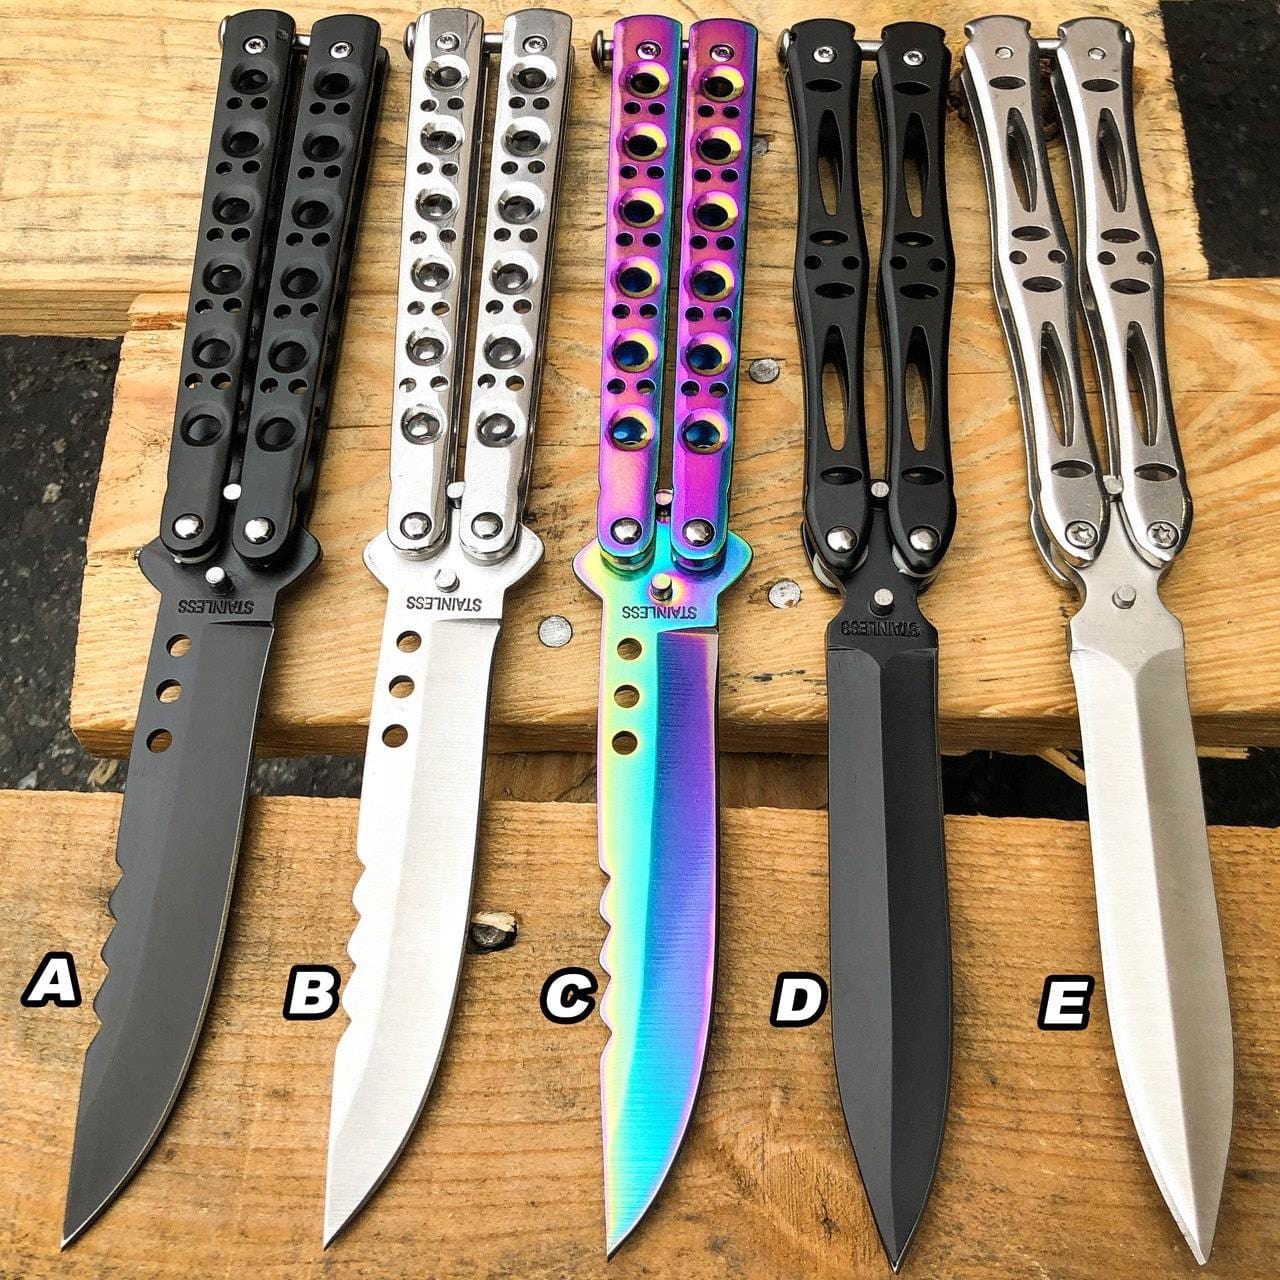  Butterfly Knife Trainer - Balisong Trainer - Practice Butterfly  Knife - Balisong Butterfly Knives NOT Real NOT Sharp Blade - Wood Dull  Trick Butterfly Knifes - Butter Fly Knife Training